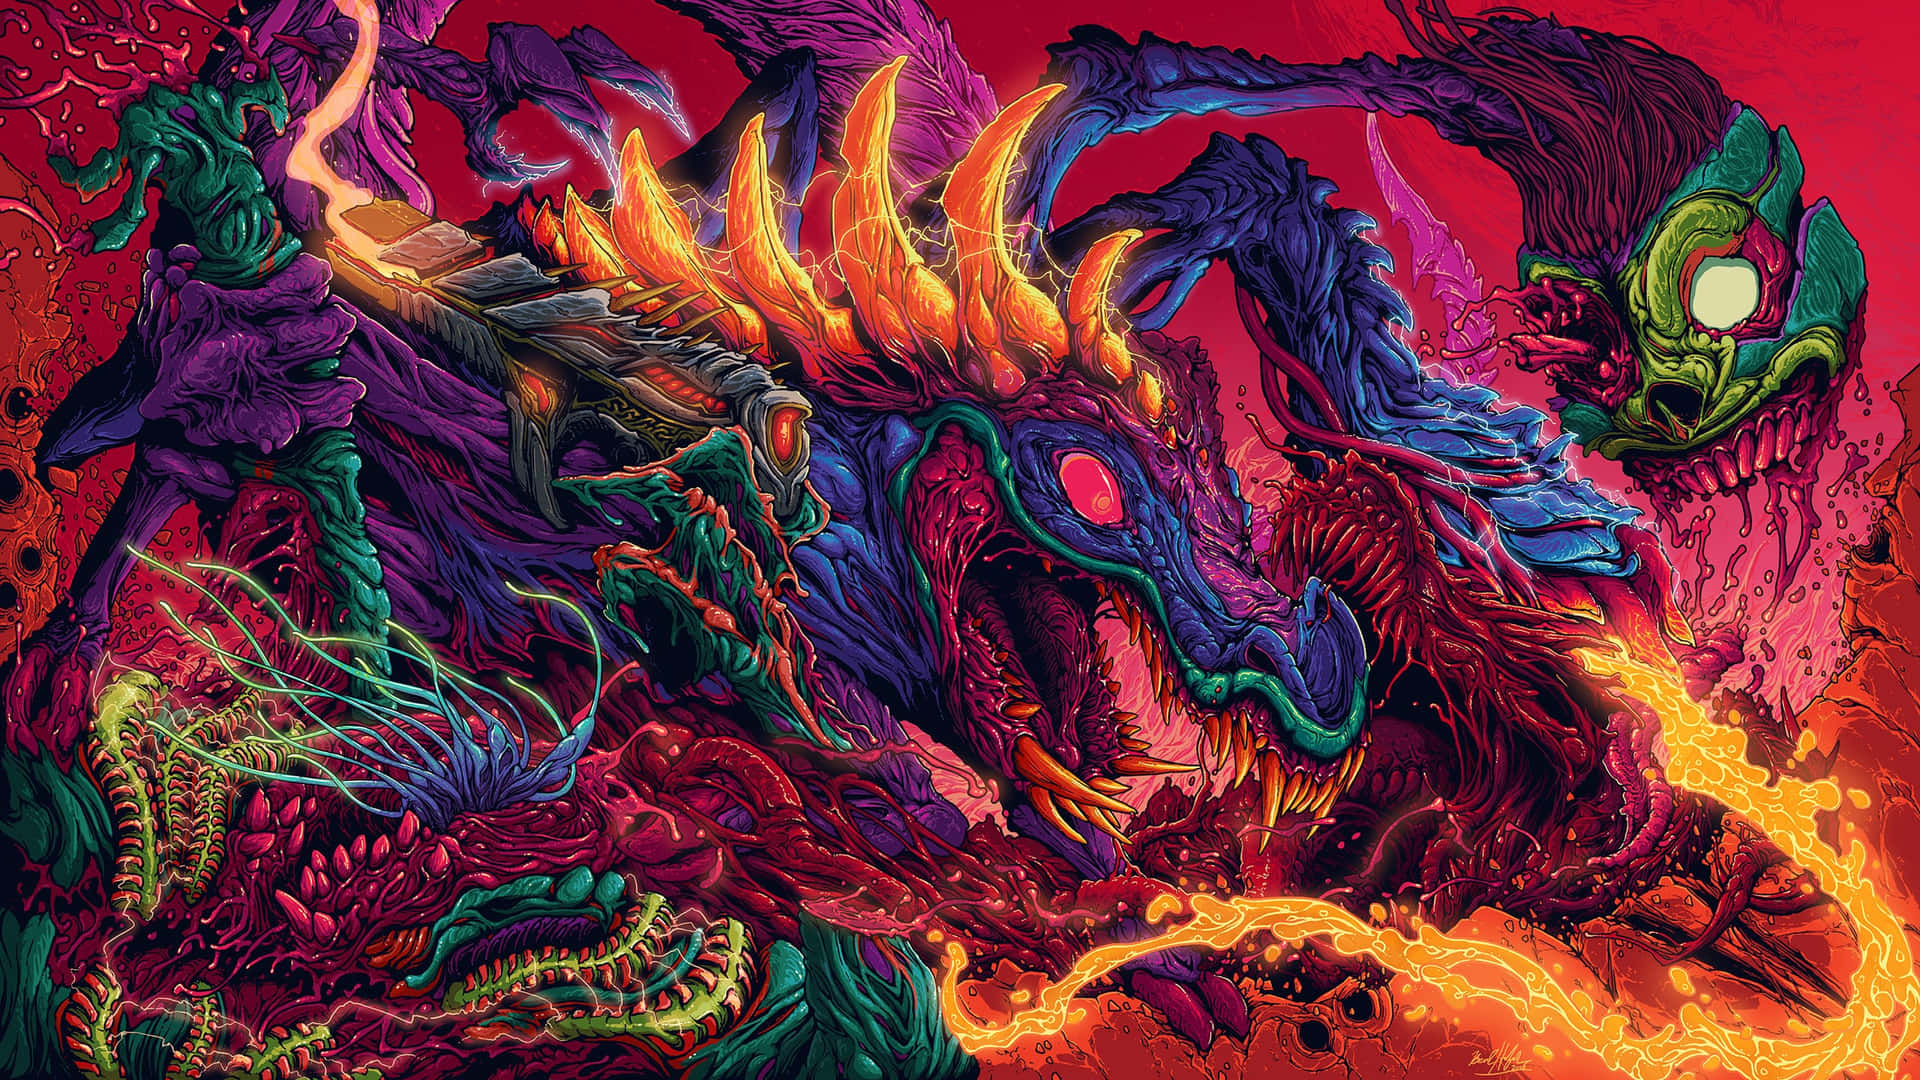 Monstrously Spectacular 2560x1440 Resolution Wallpaper